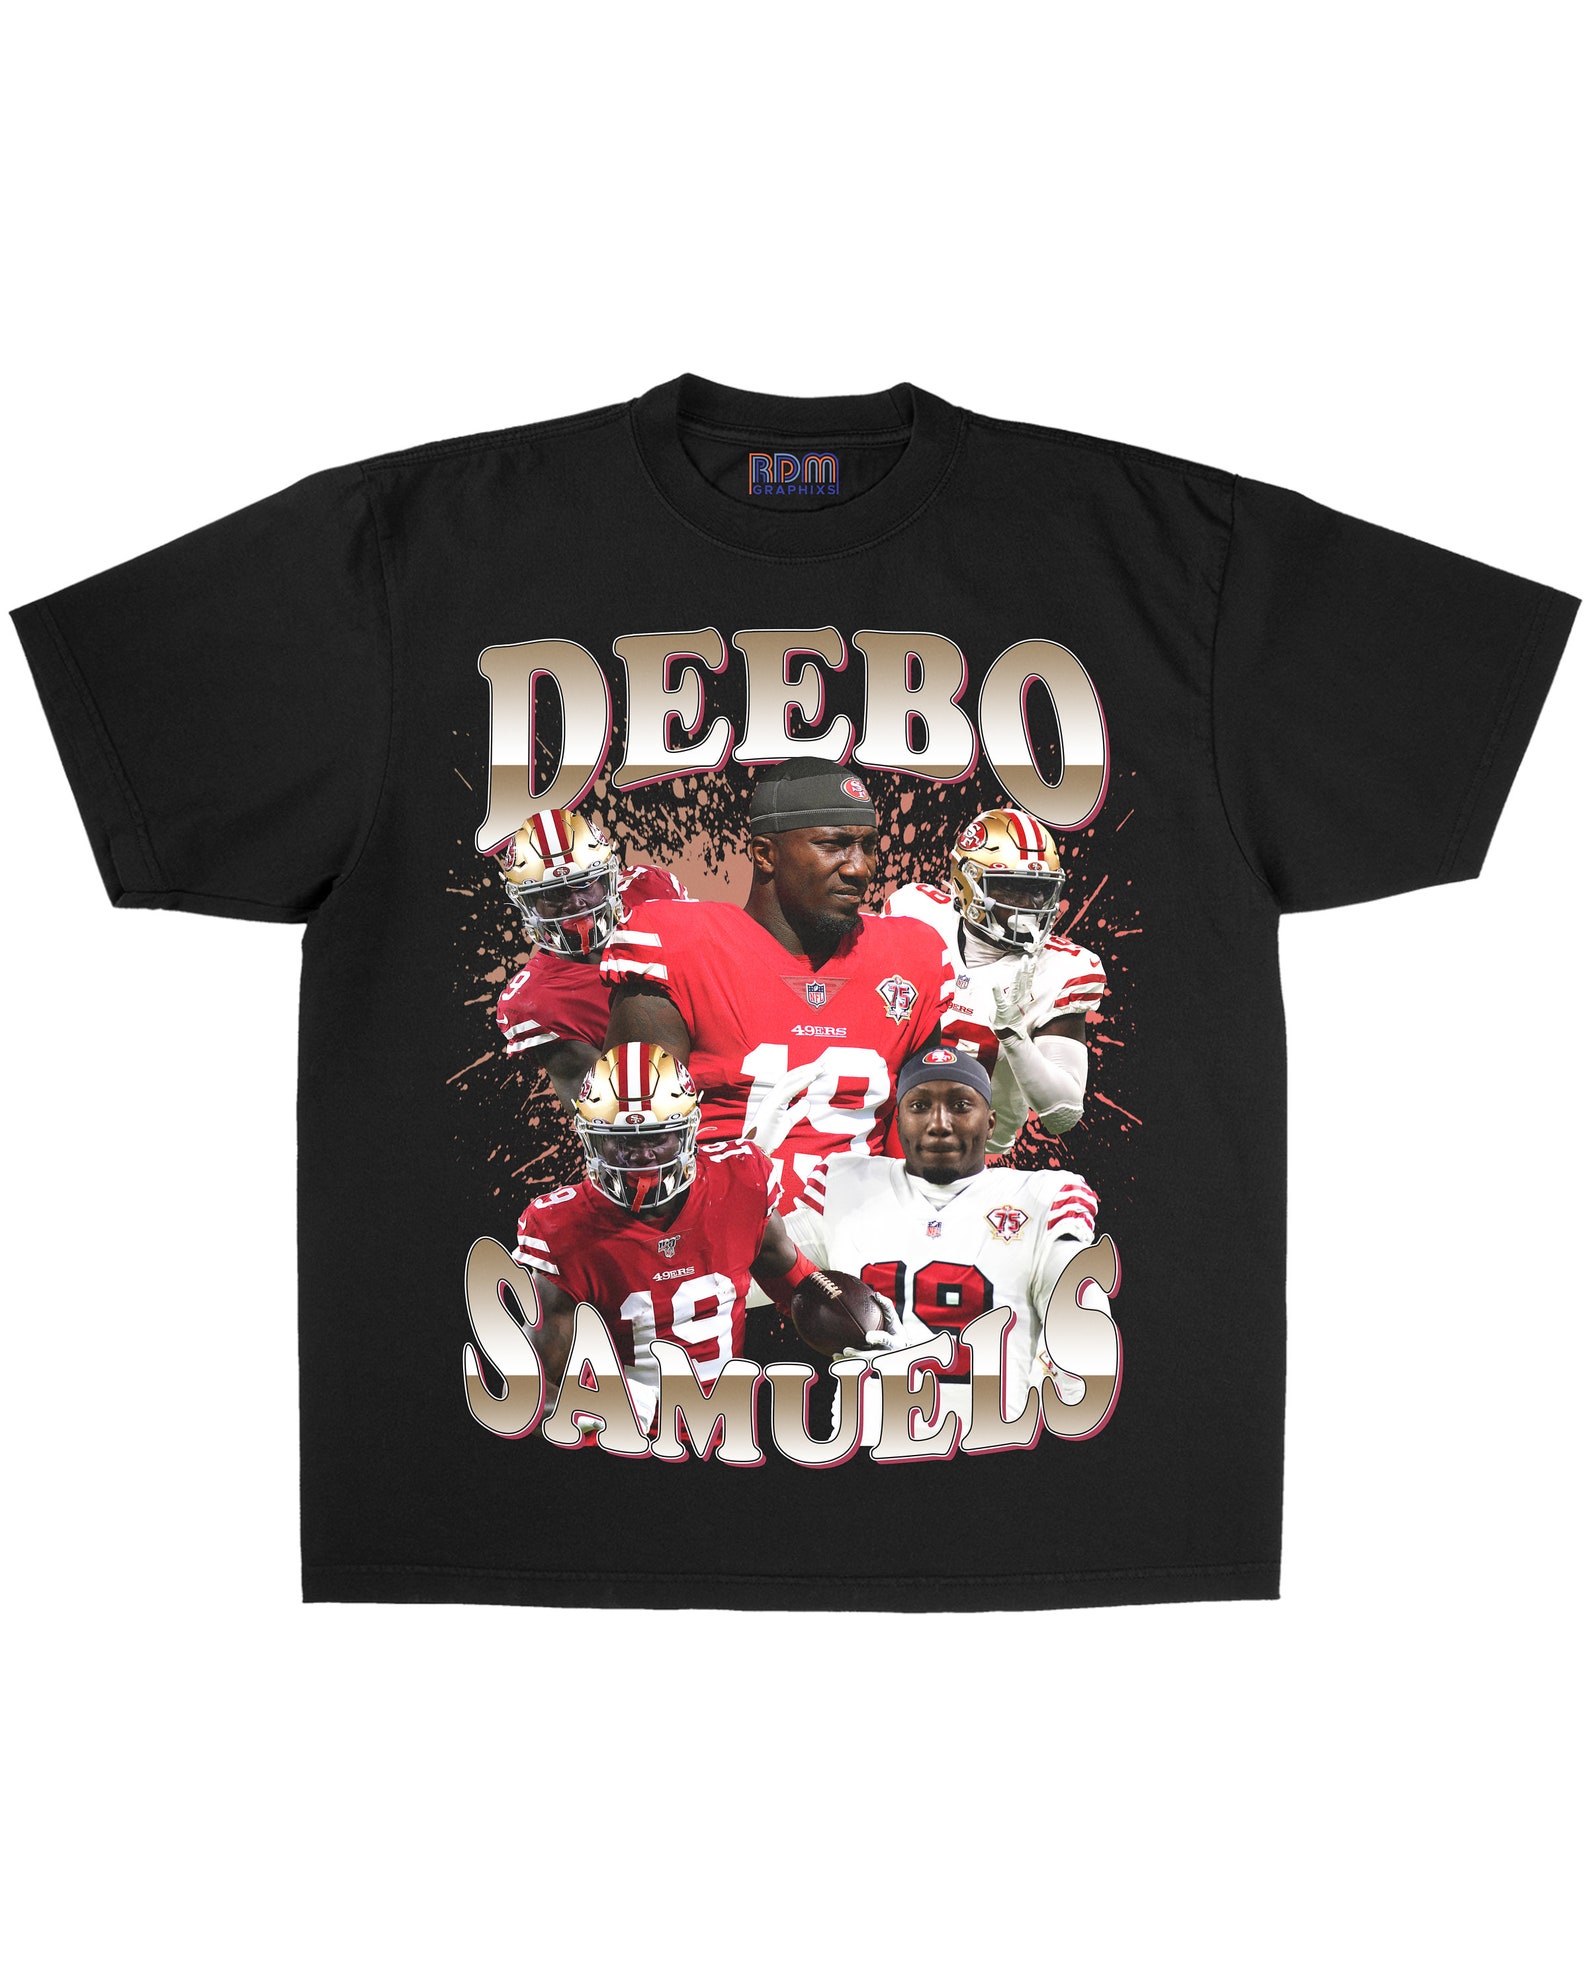 Deebo Png Jpg 49ers Png Jpg Niners Png Jpg Niner Gang Png - Etsy